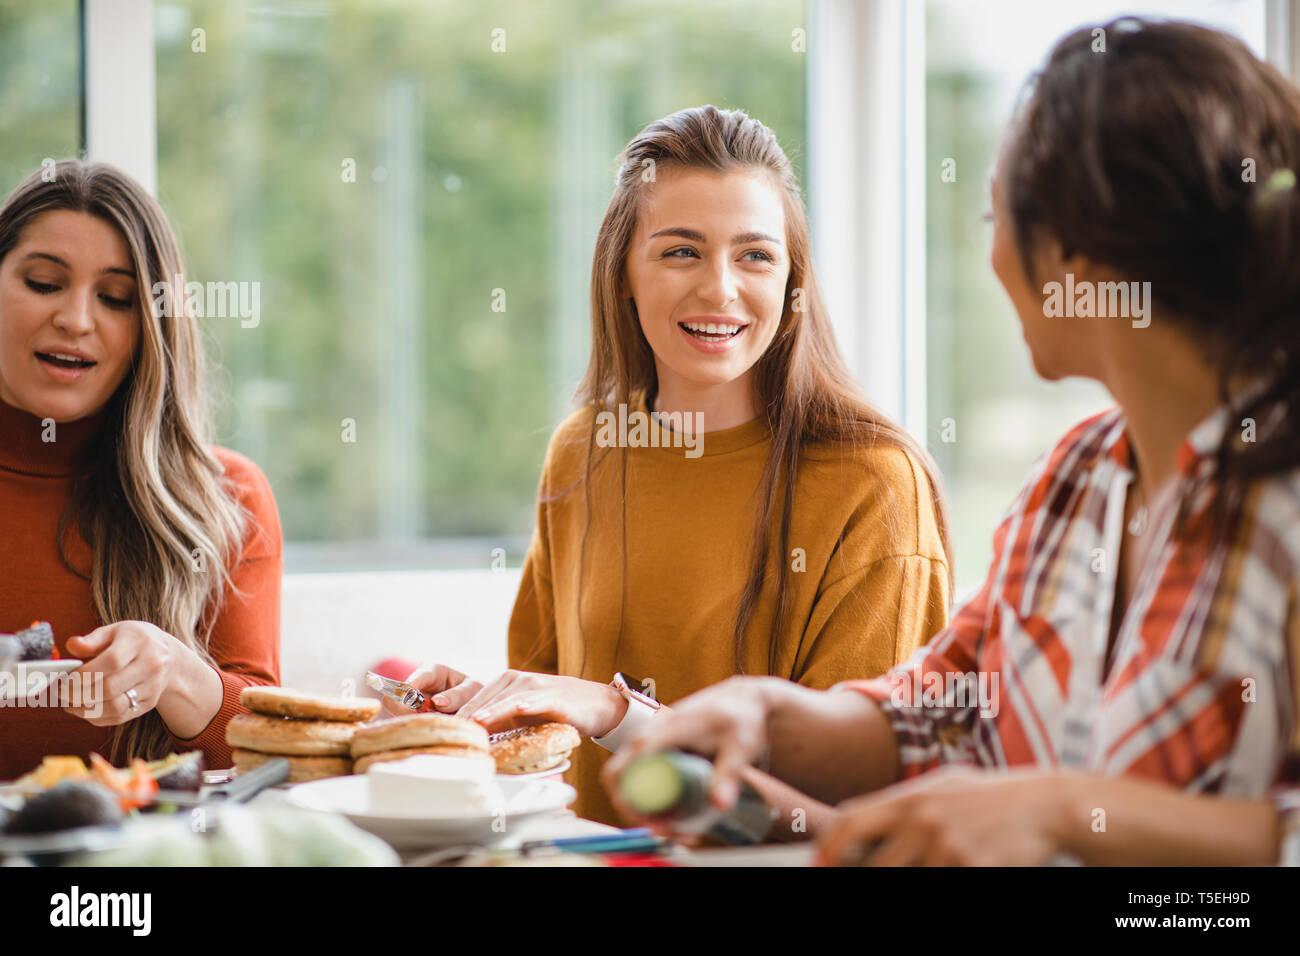 young female adult talking to her friend while having a healthy lunch. They are sitting inside of a conservatory, enjoying themselves. Stock Photo